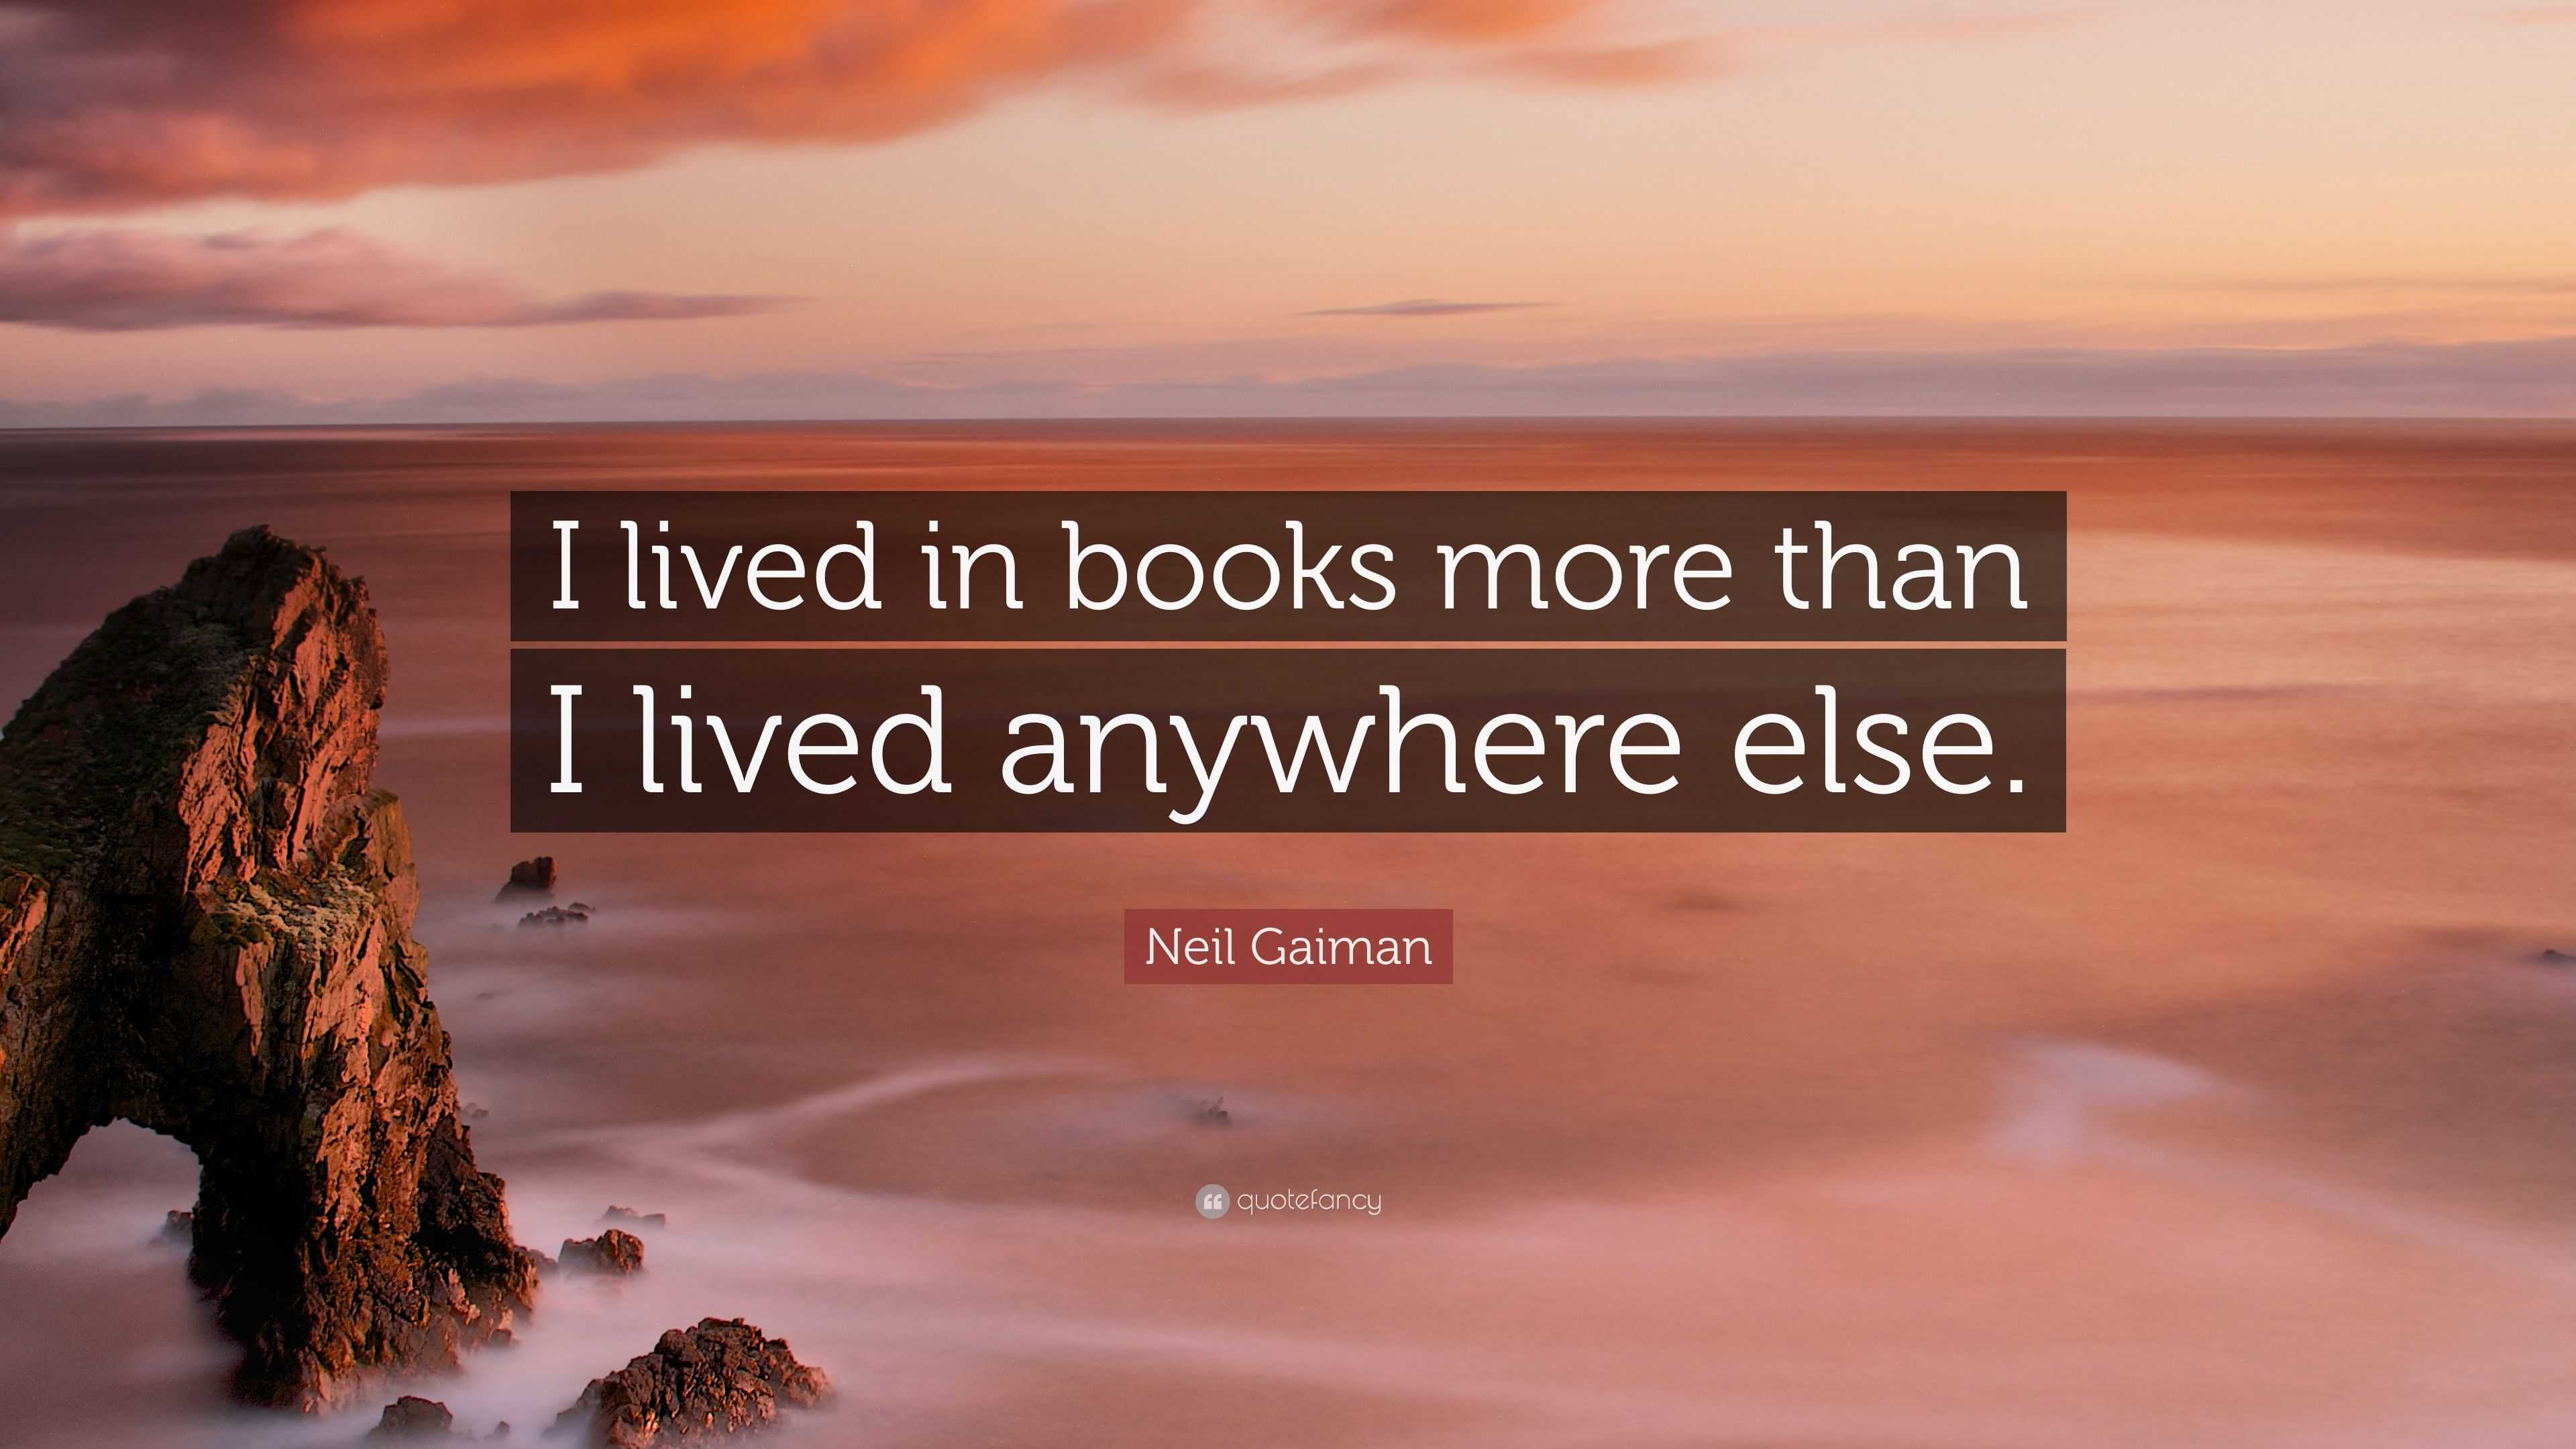 Neil Gaiman Quote: “I lived in books more than I lived anywhere else.”